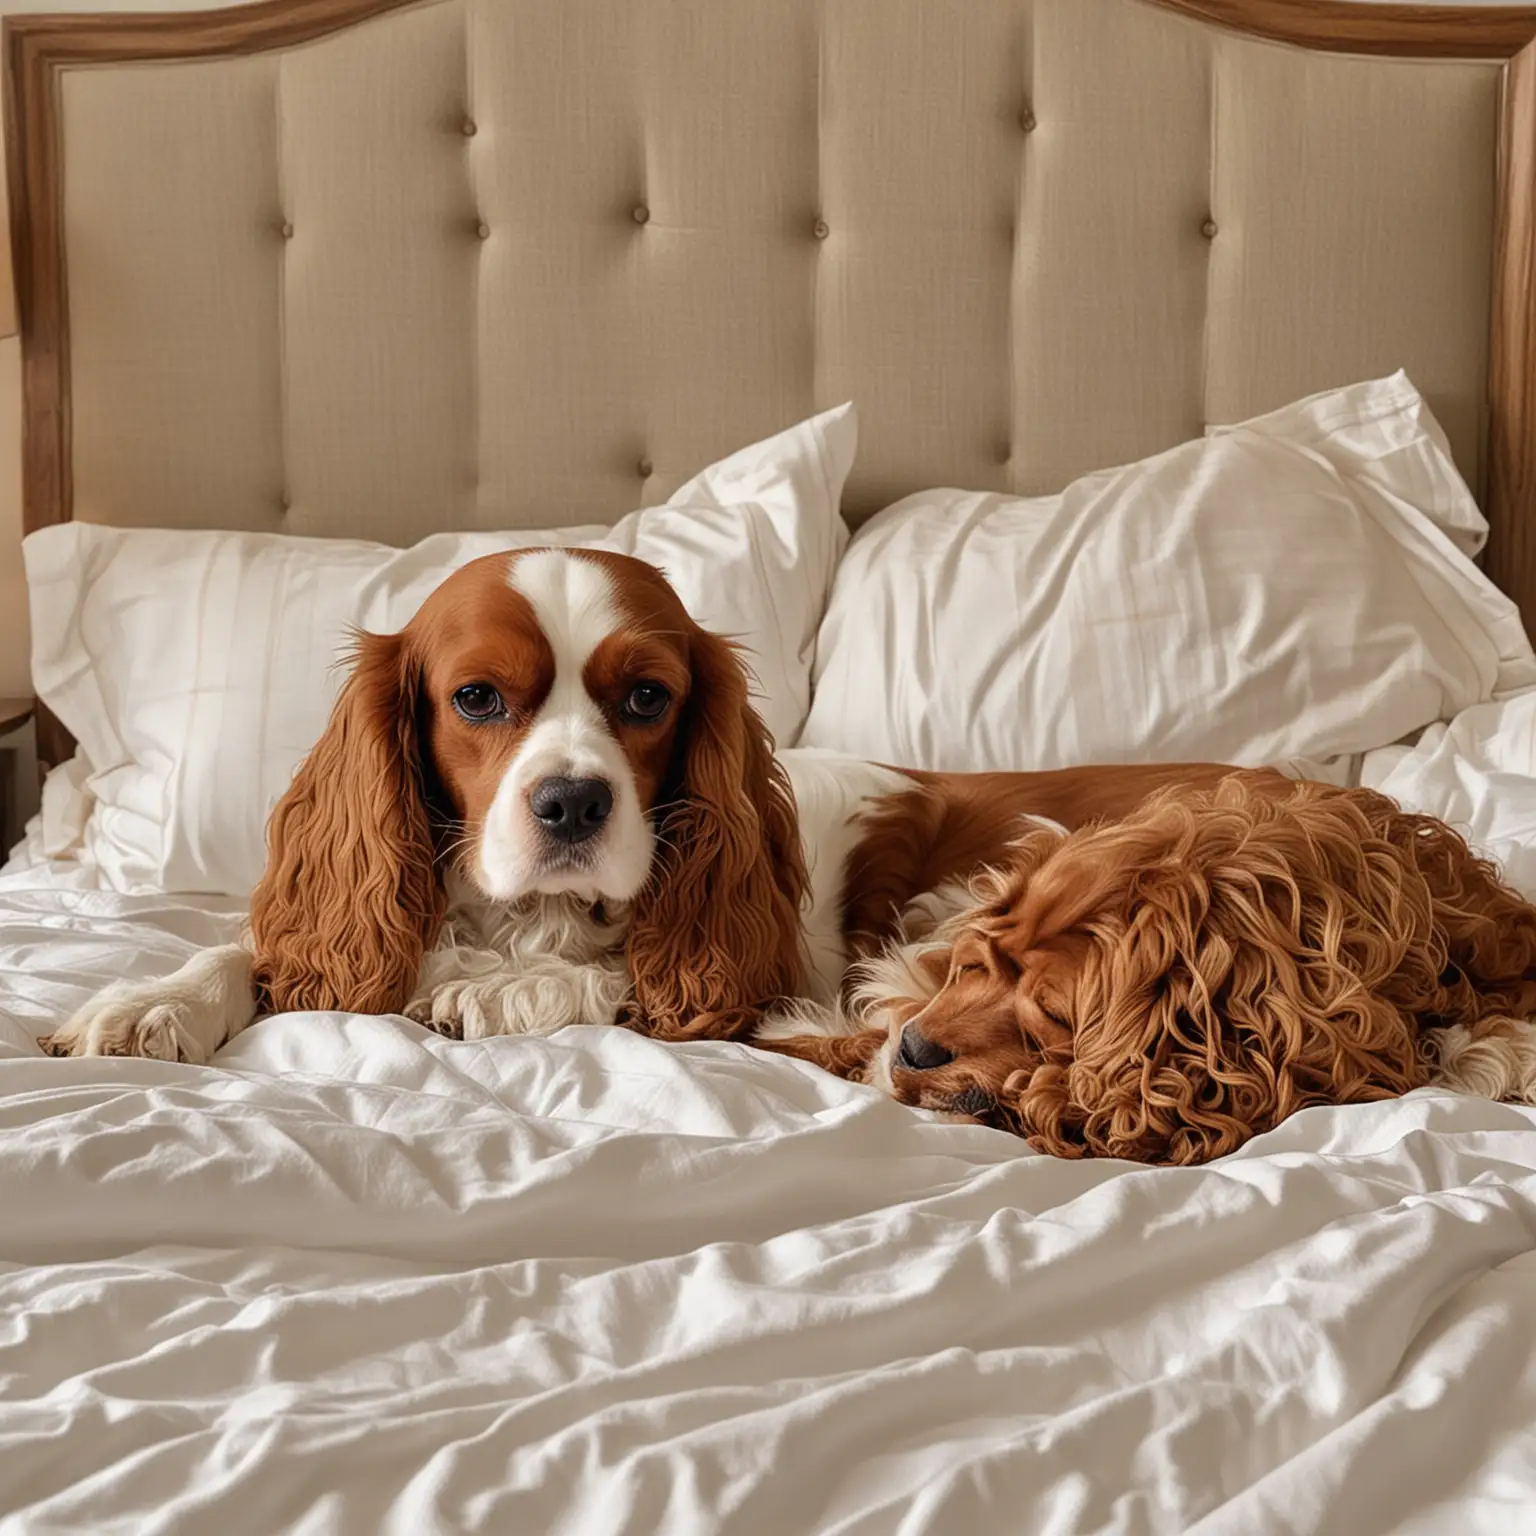 Cavalier Spaniel Sleeping Comfortably with Elderly Couple on Bed